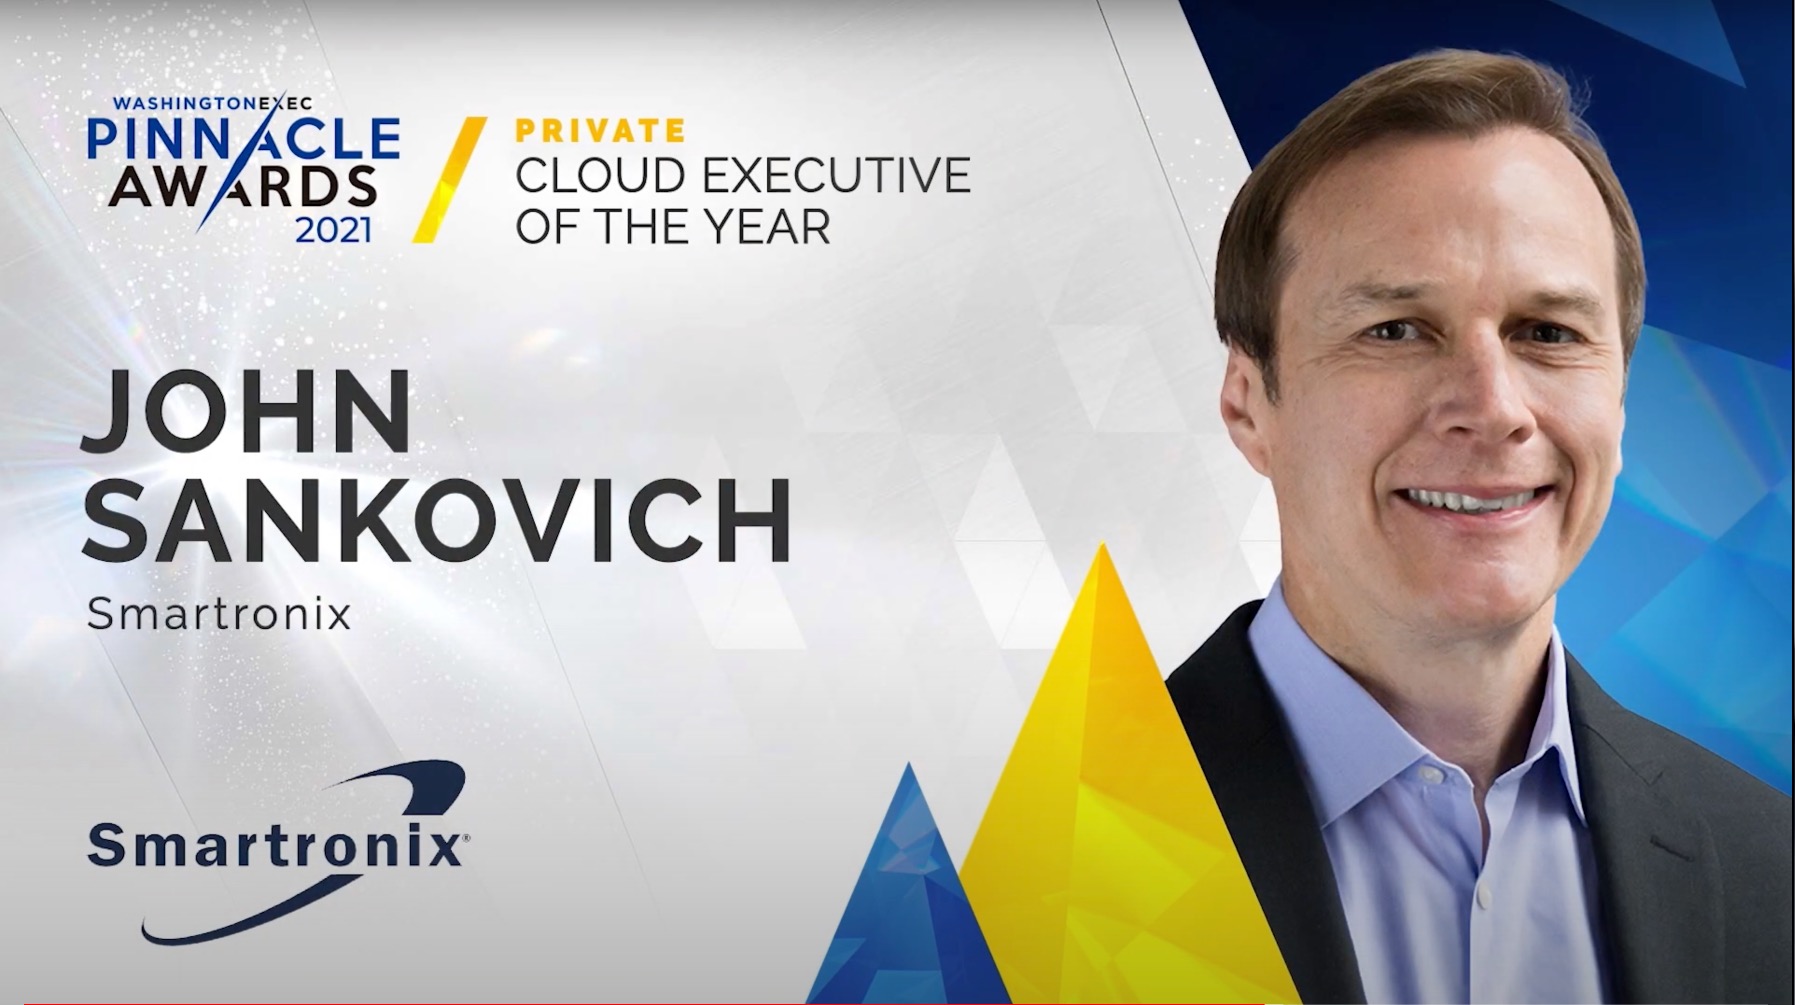 Cloud - Congratulations to John Sankovich from Smartronix (now SMX) on winning the award for Cloud Executive of the Year in the Private Sector